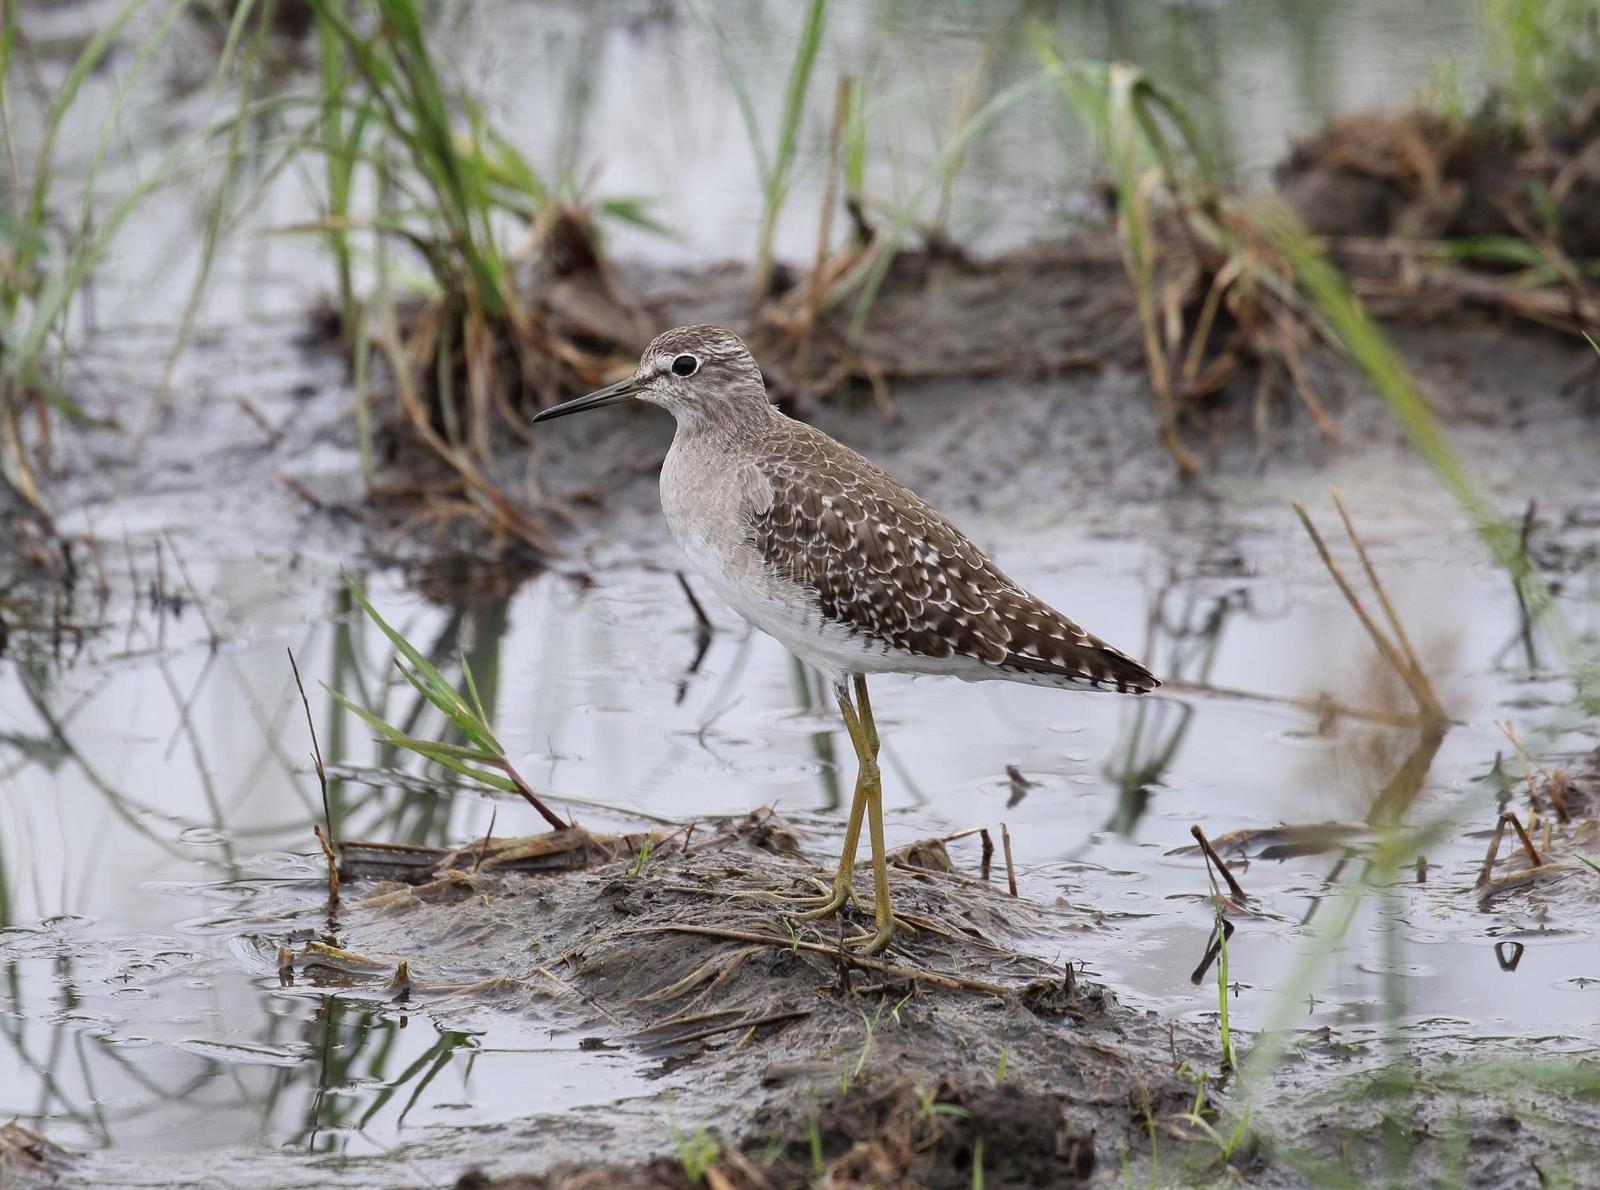 Wood Sandpiper Photo by Nate Dias